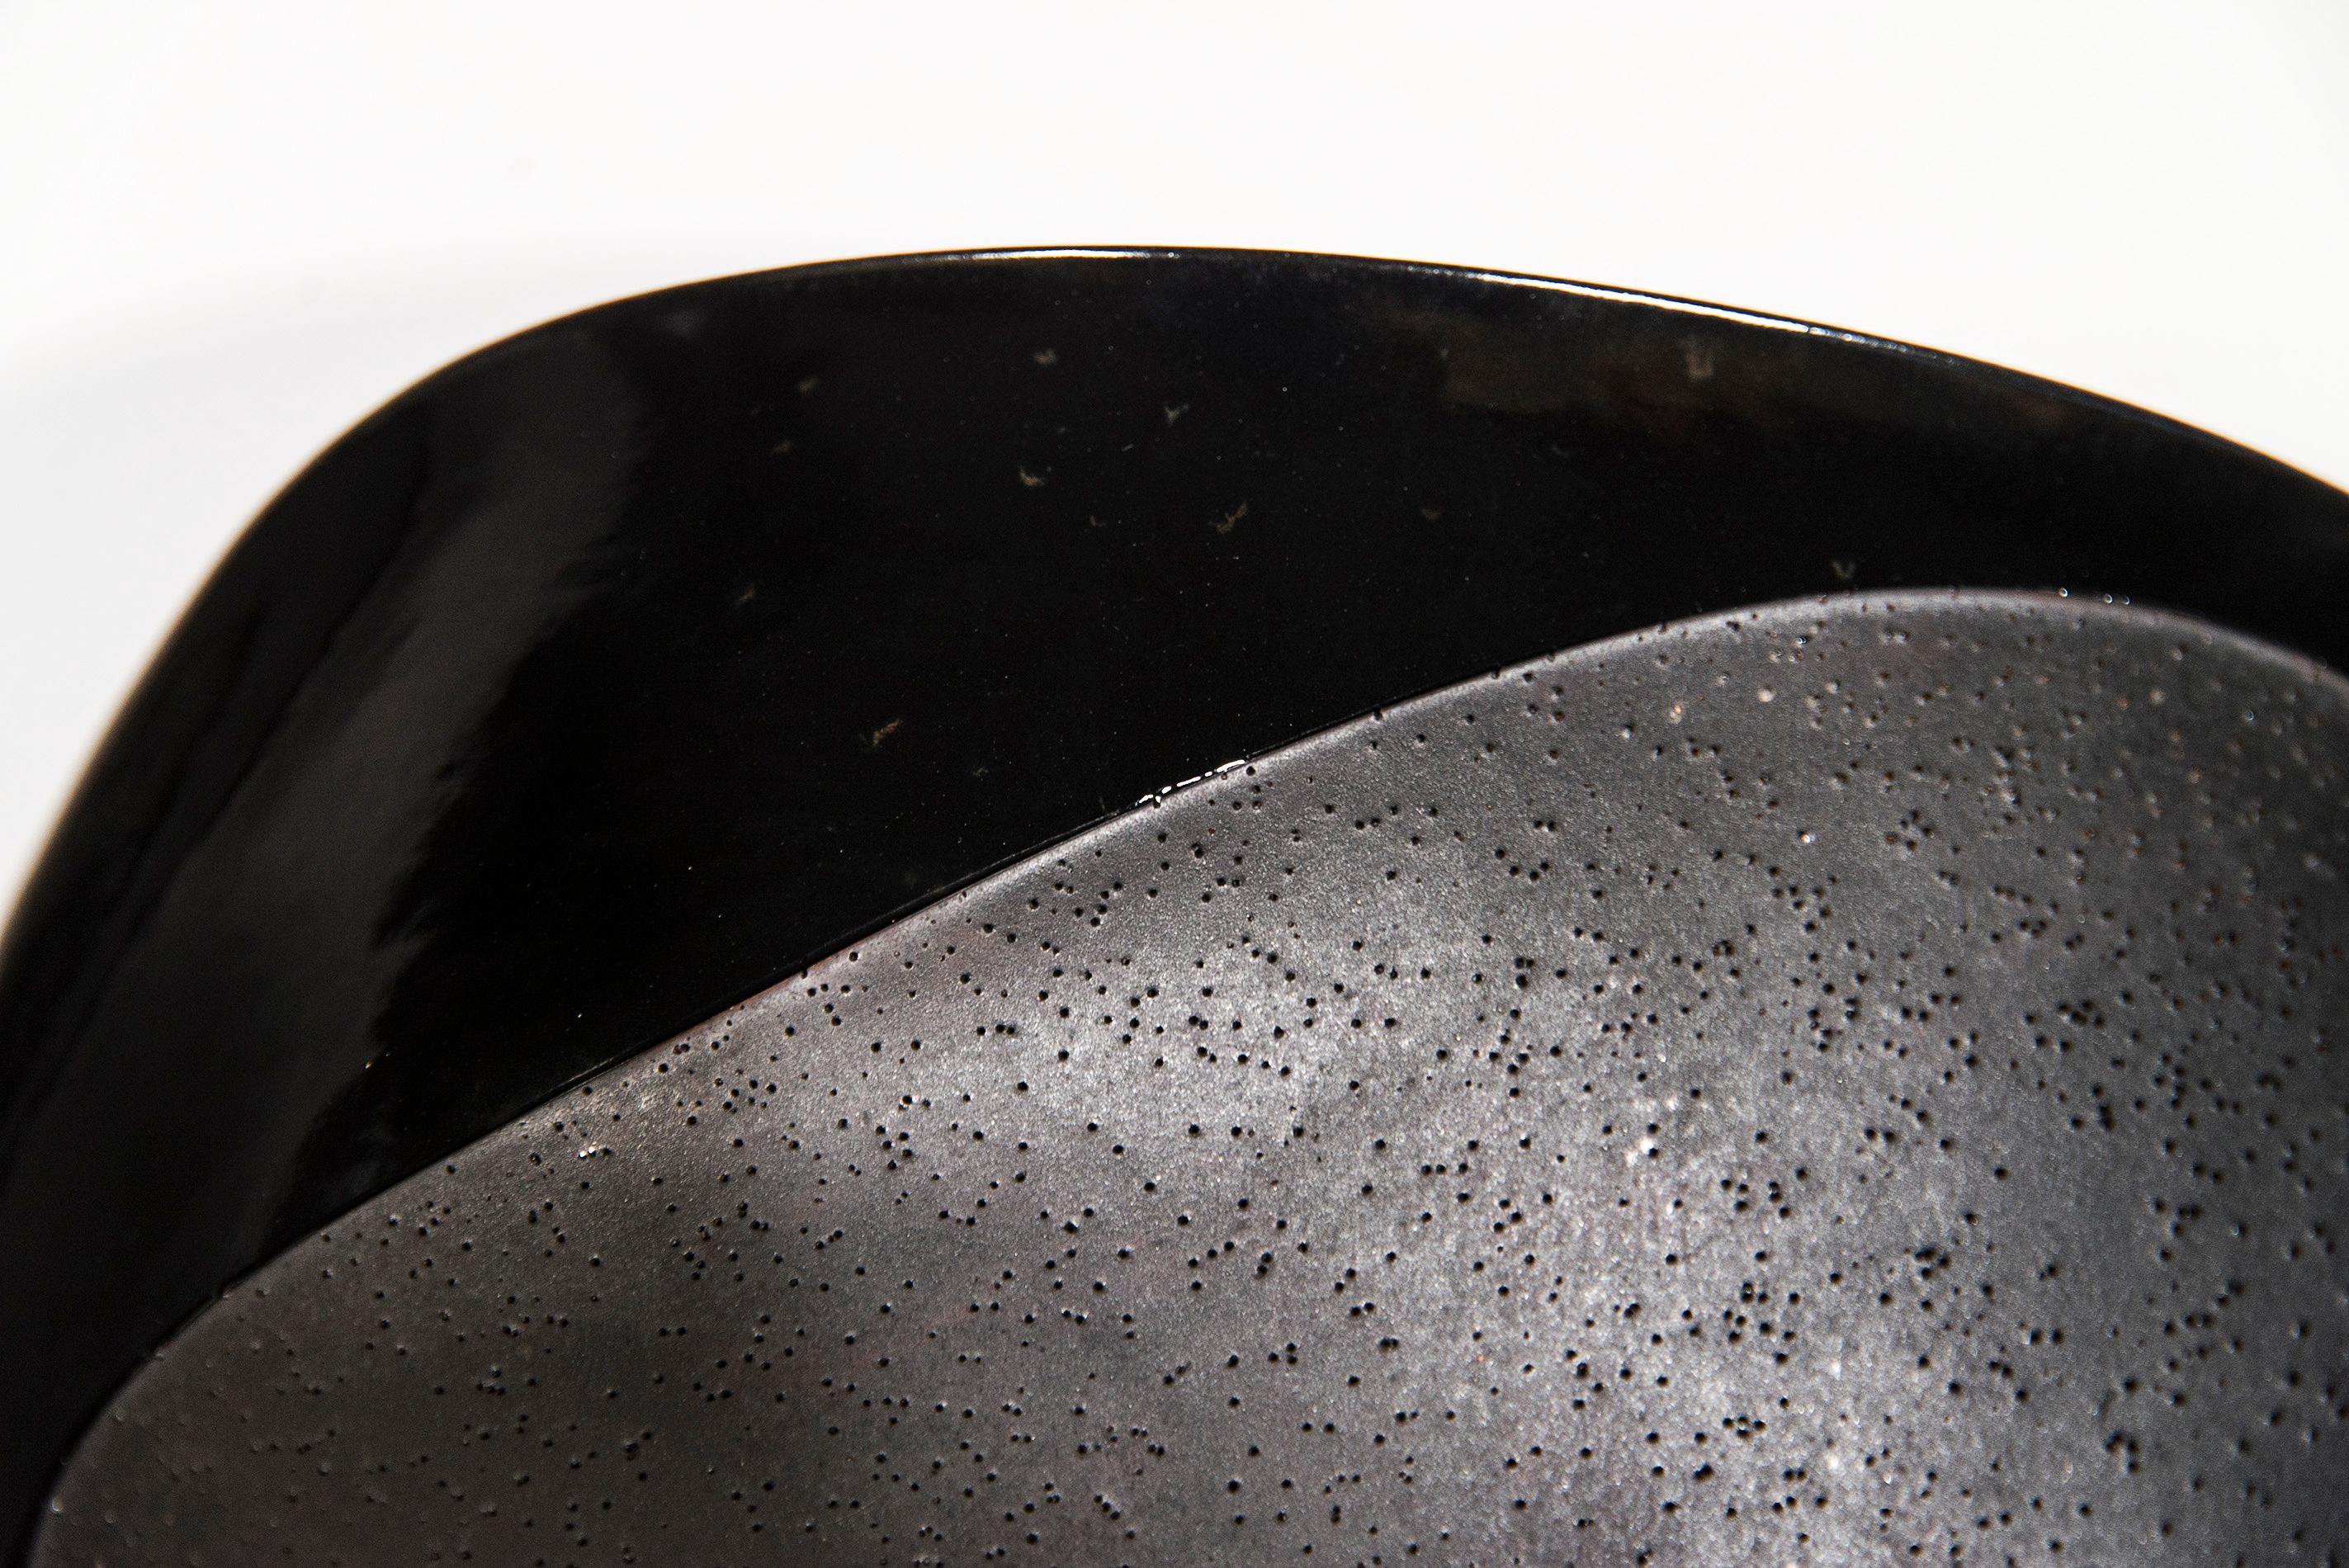 Afterlife No 4  - glossy black, grey, nature inspired, elongated, ceramic vessel For Sale 1